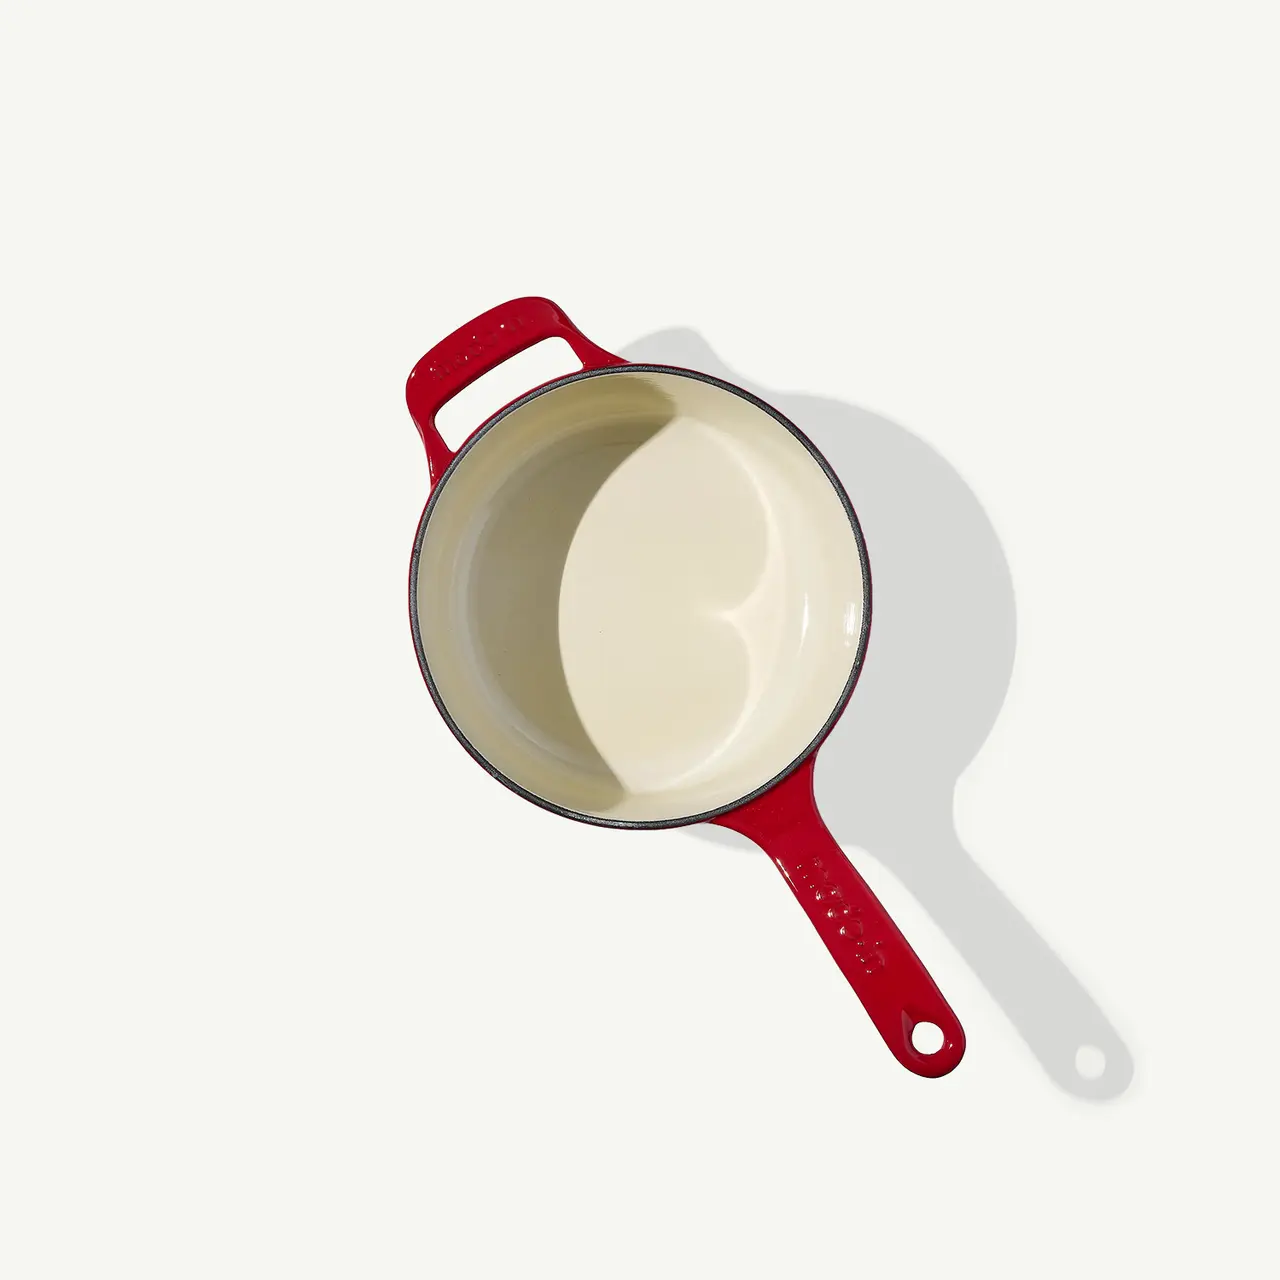 A red-handled saucepan is sitting on a plain surface casting a slight shadow, viewed from above.